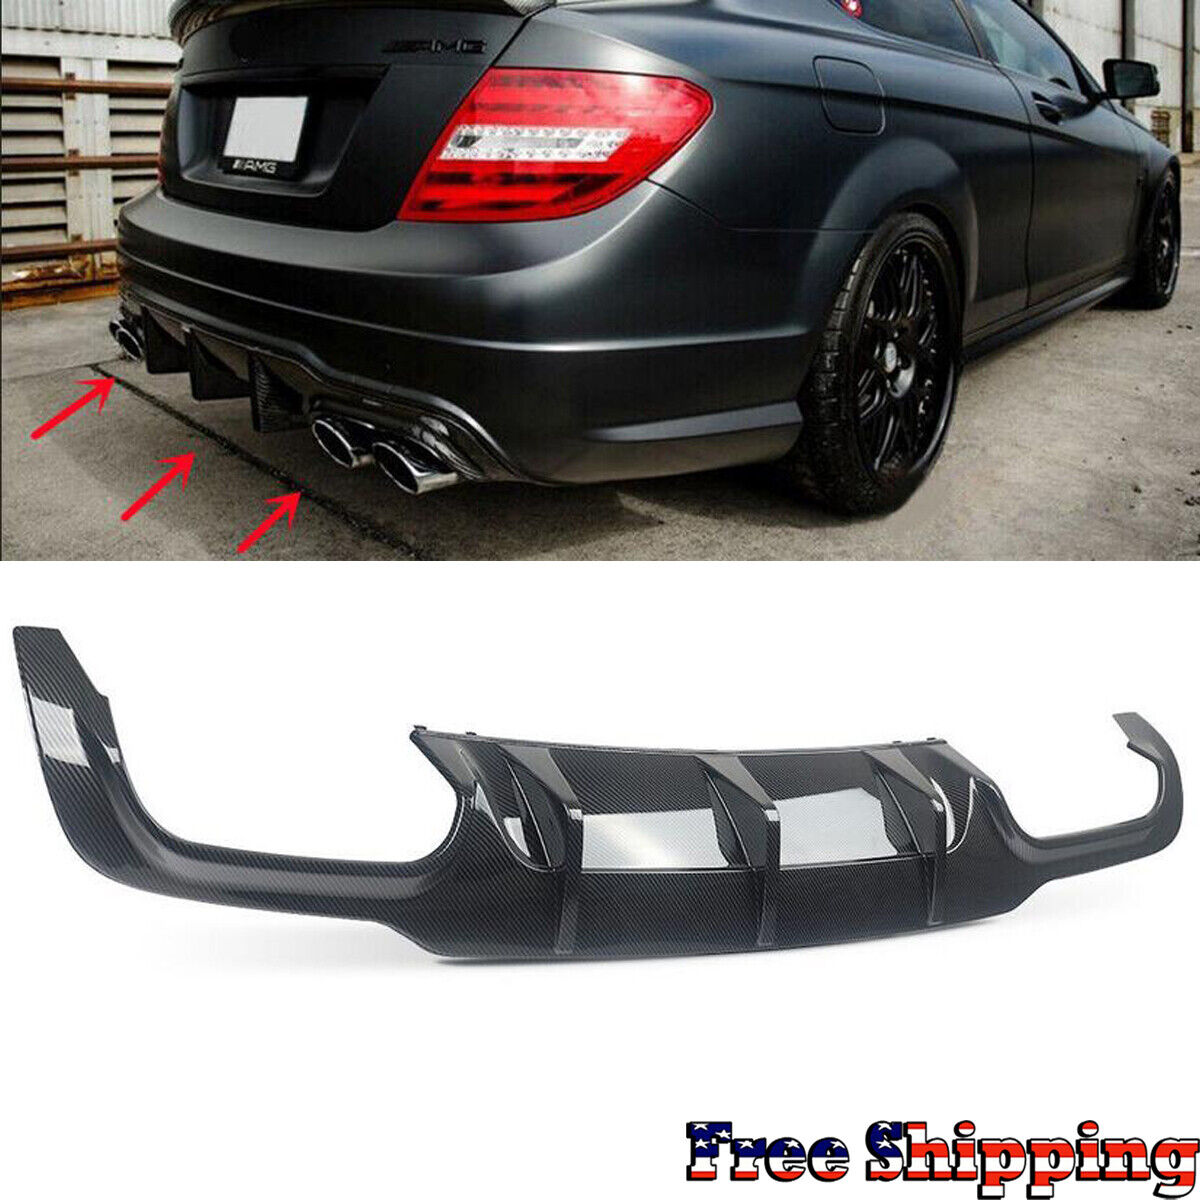 Carbon Style ABS Rear Diffuser Lip For Benz W204 C250 C300 C350 C63 AMG 12-15